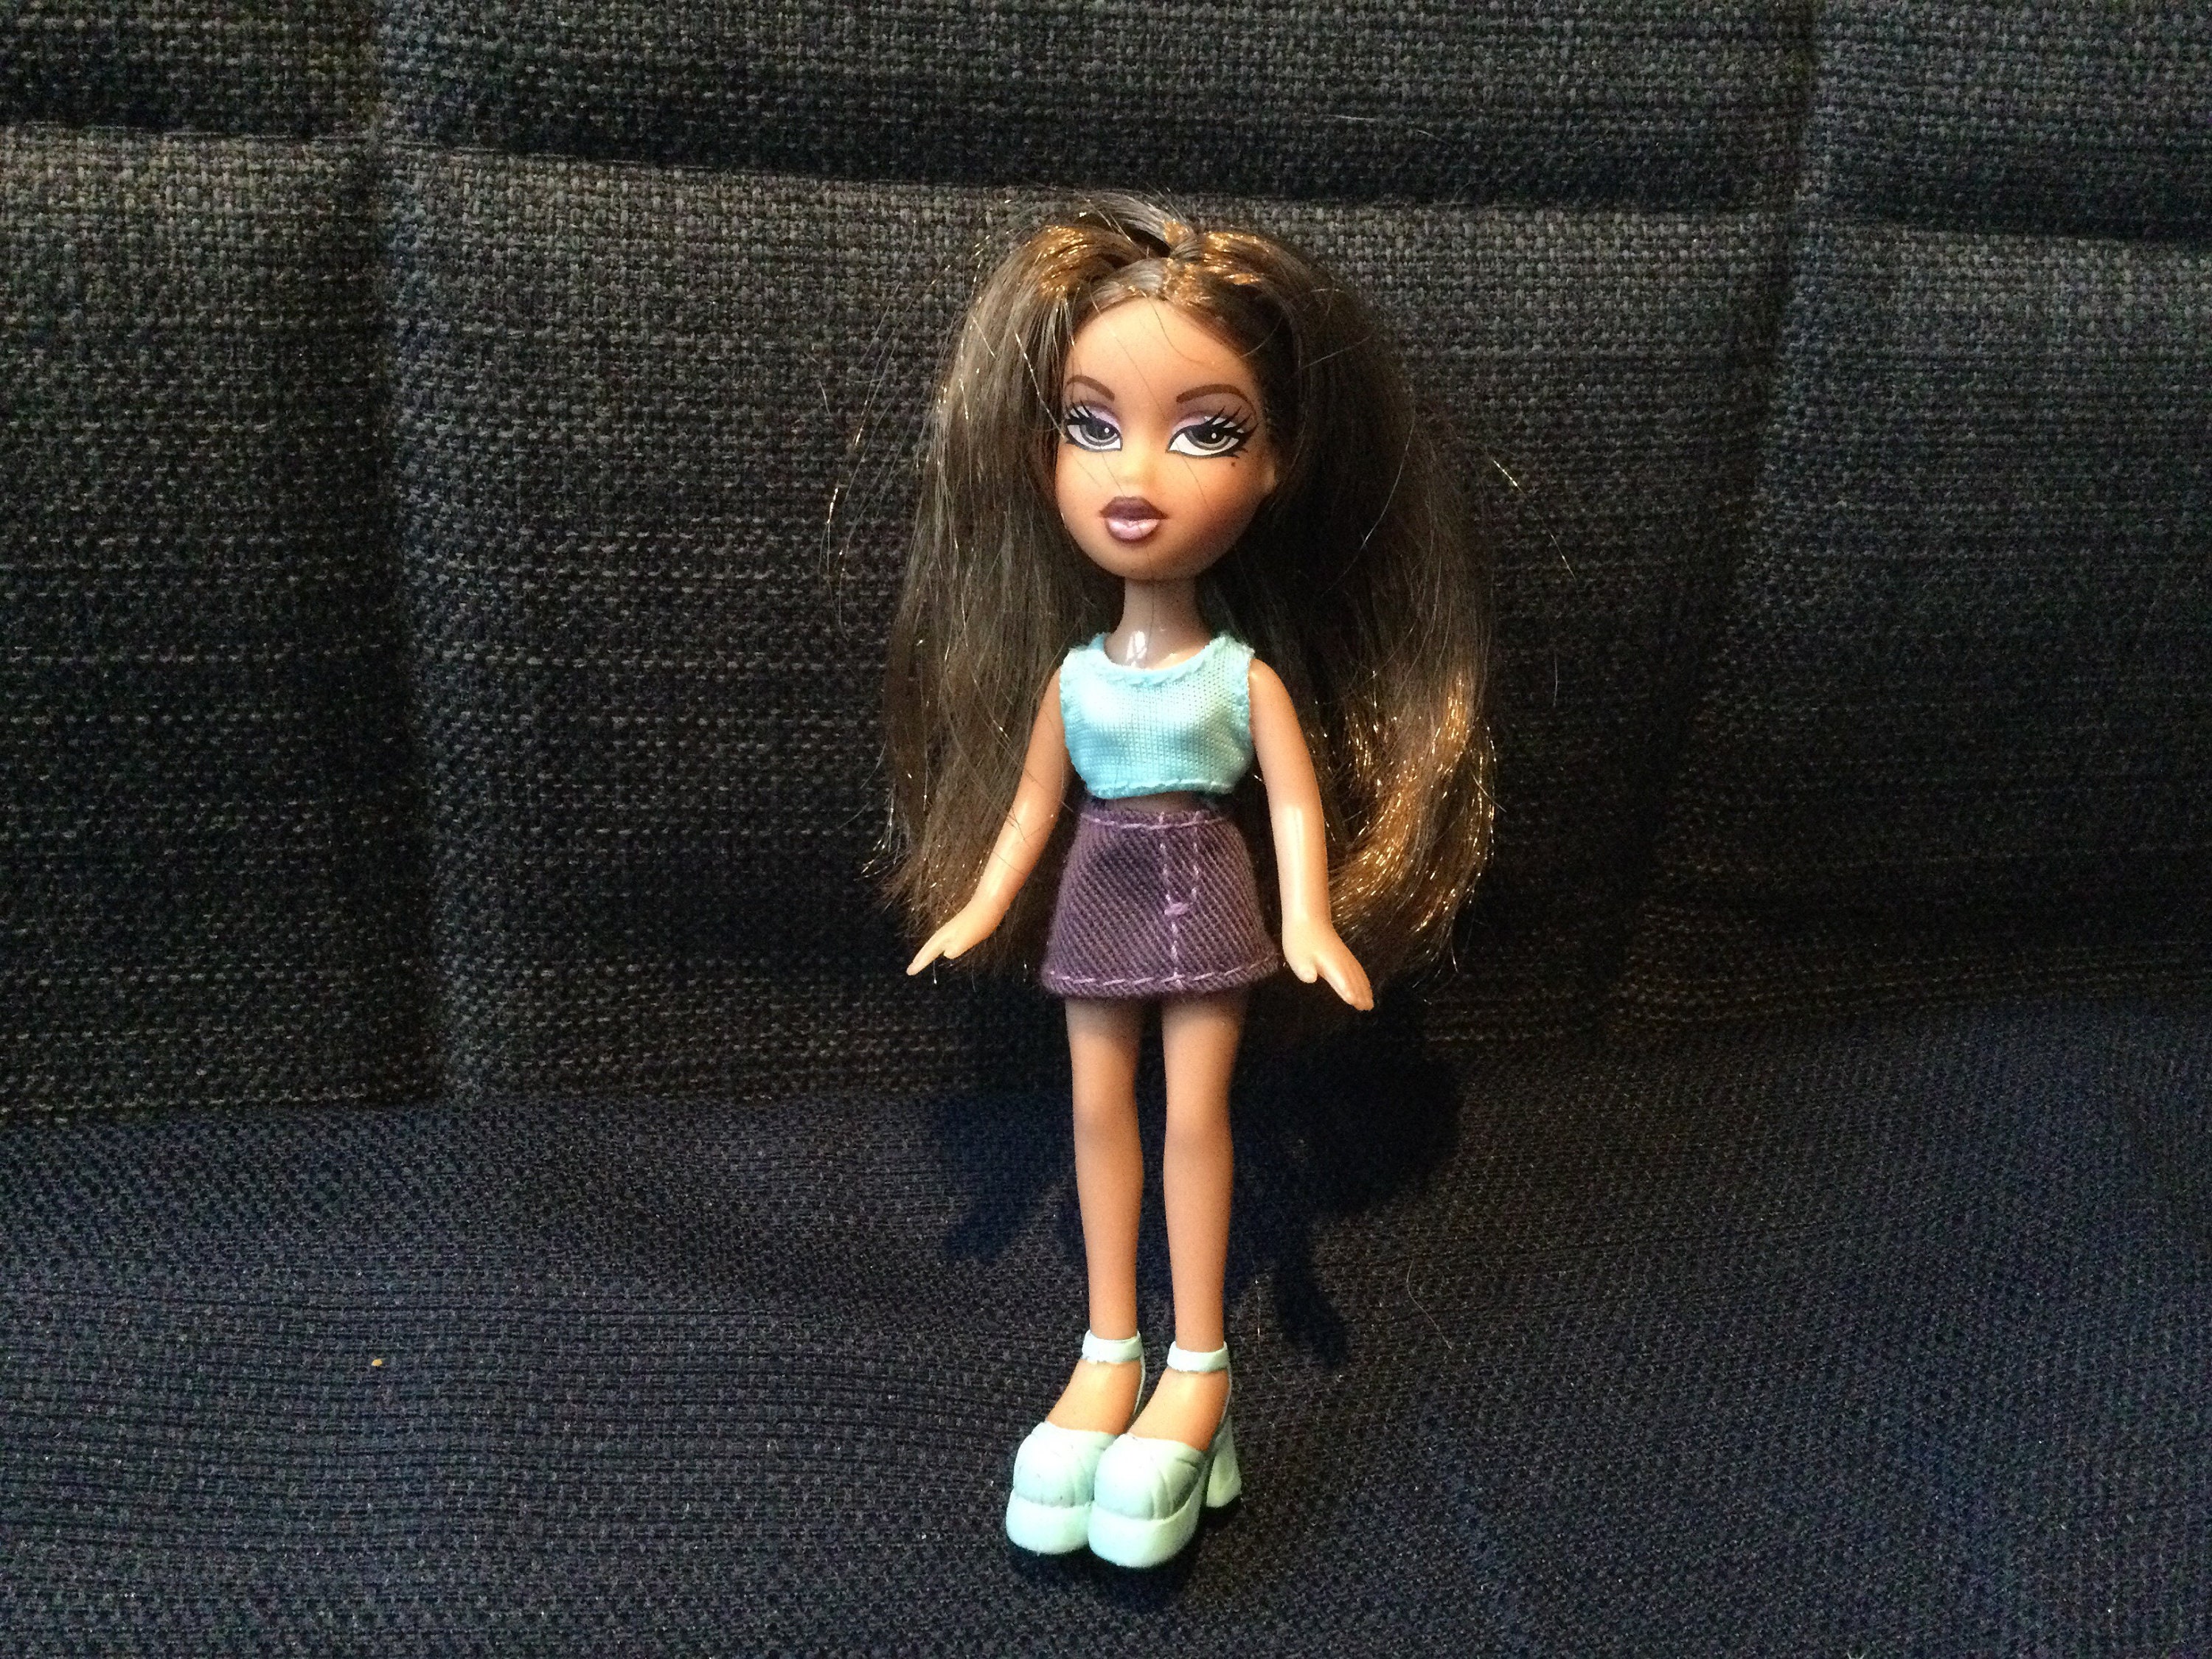 Retired Adorable Bratz Mini 5 inch Yasmin in original blue outfit and shoes